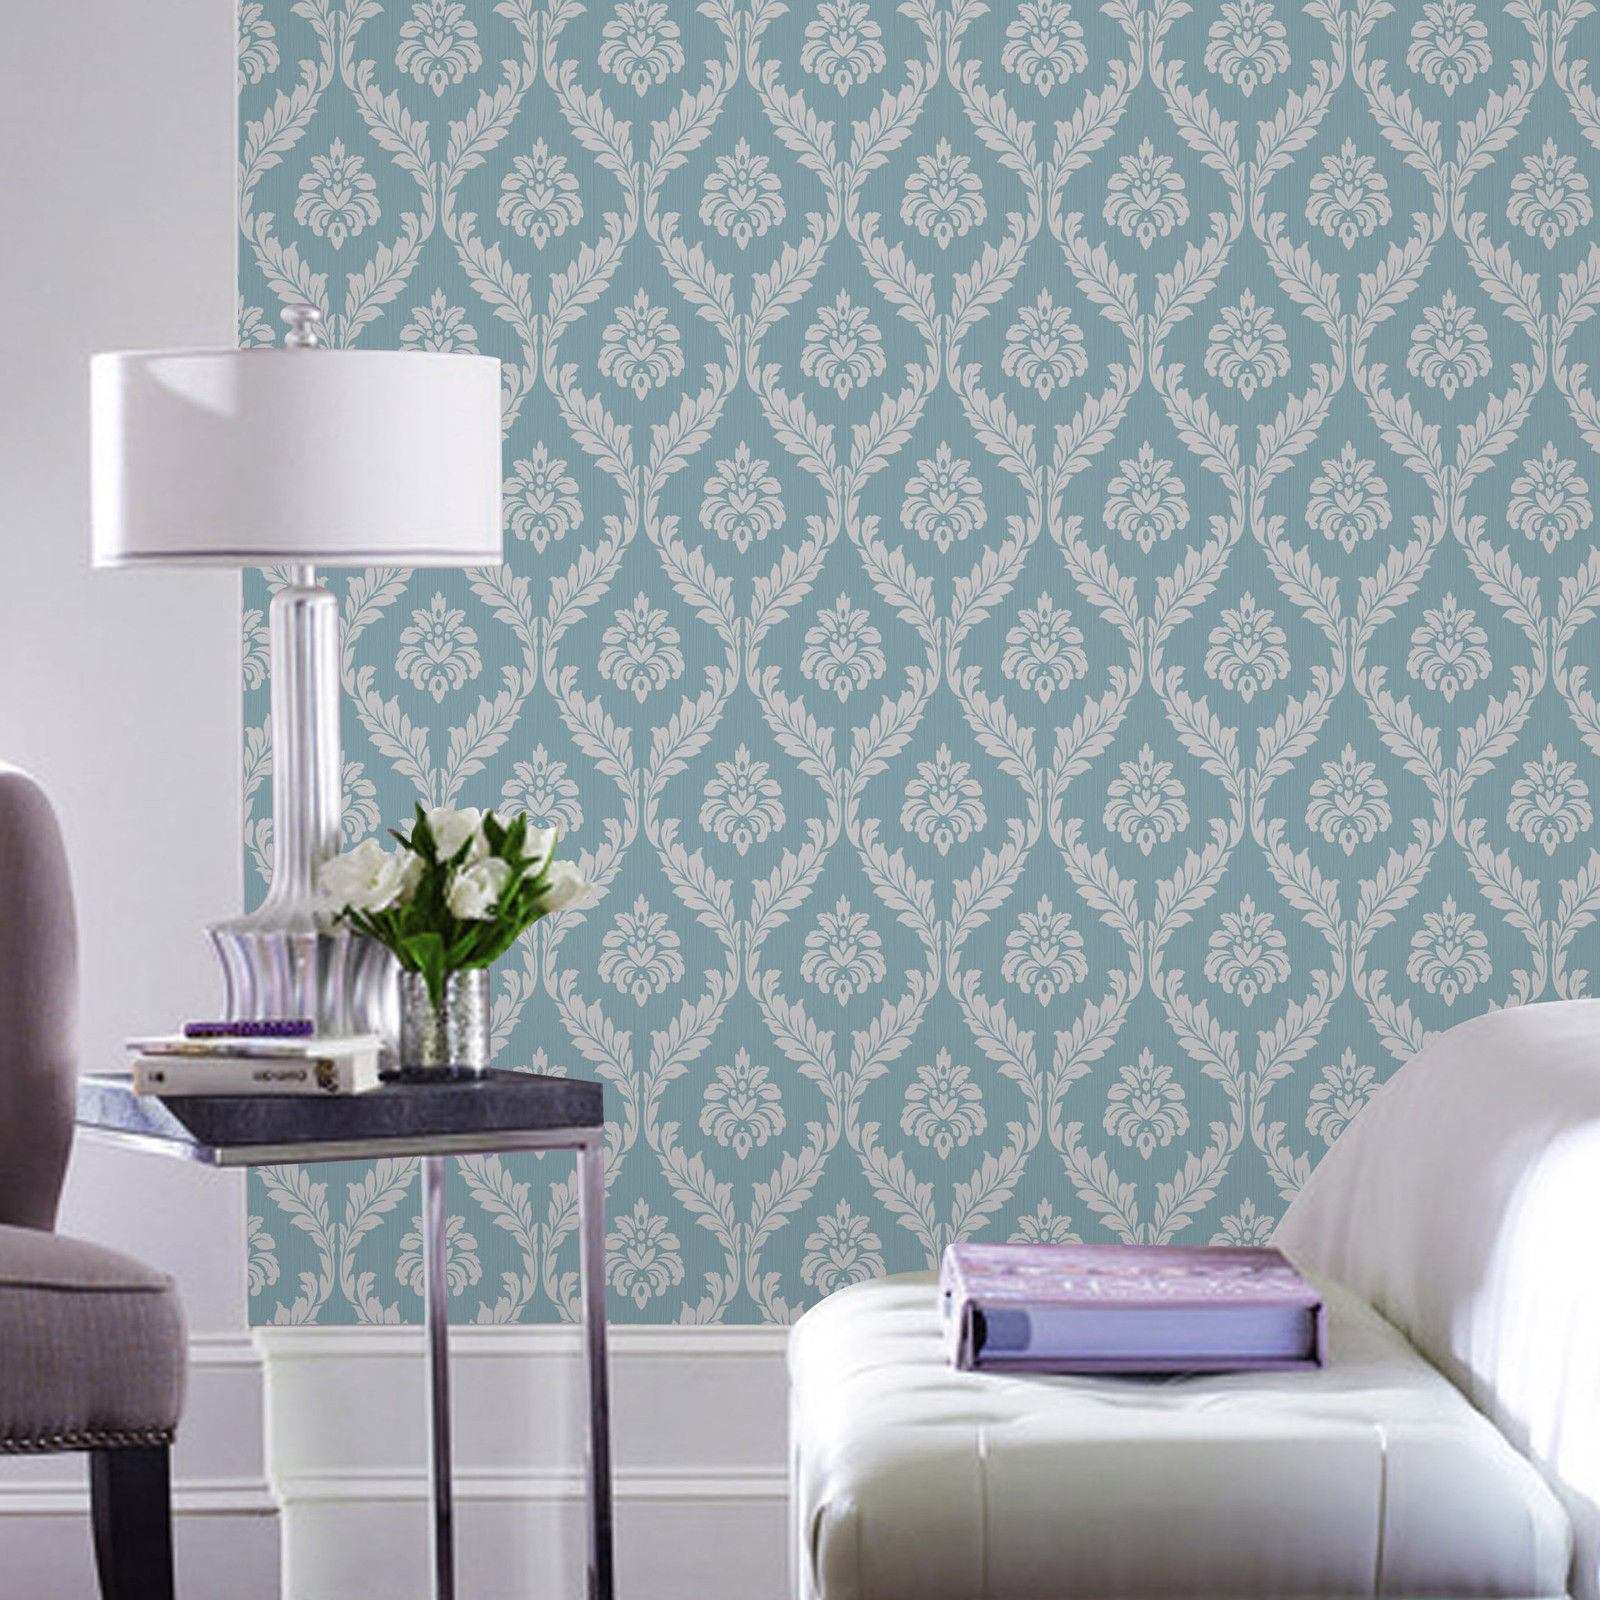  Roll Size Grey Floral Damask Teal Background Texture Vinyl Wallpaper 1600x1600